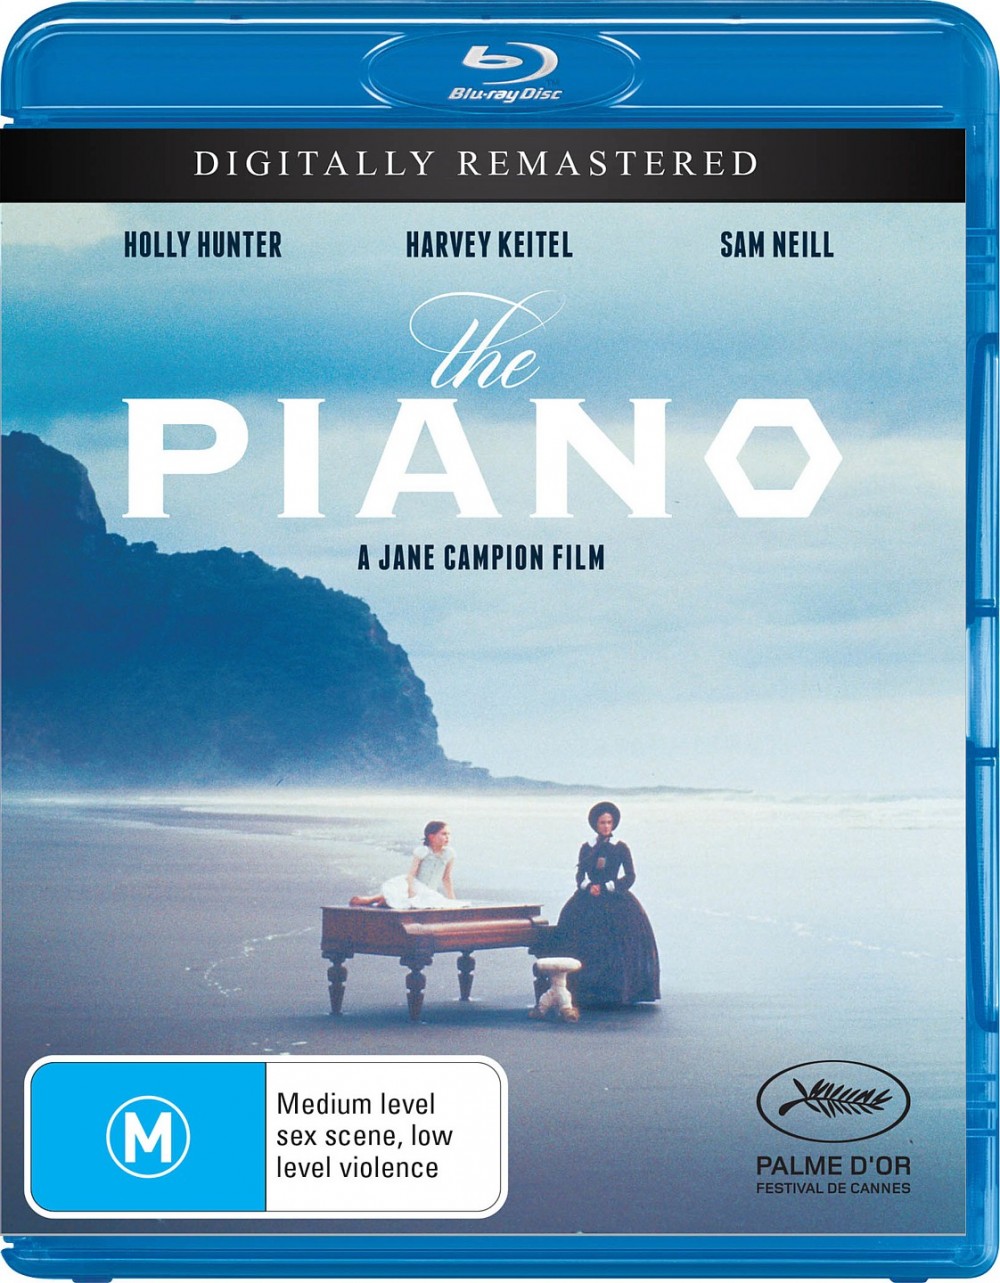 the.piano.1993.remastered.bluray.front.cover.aus.jpg